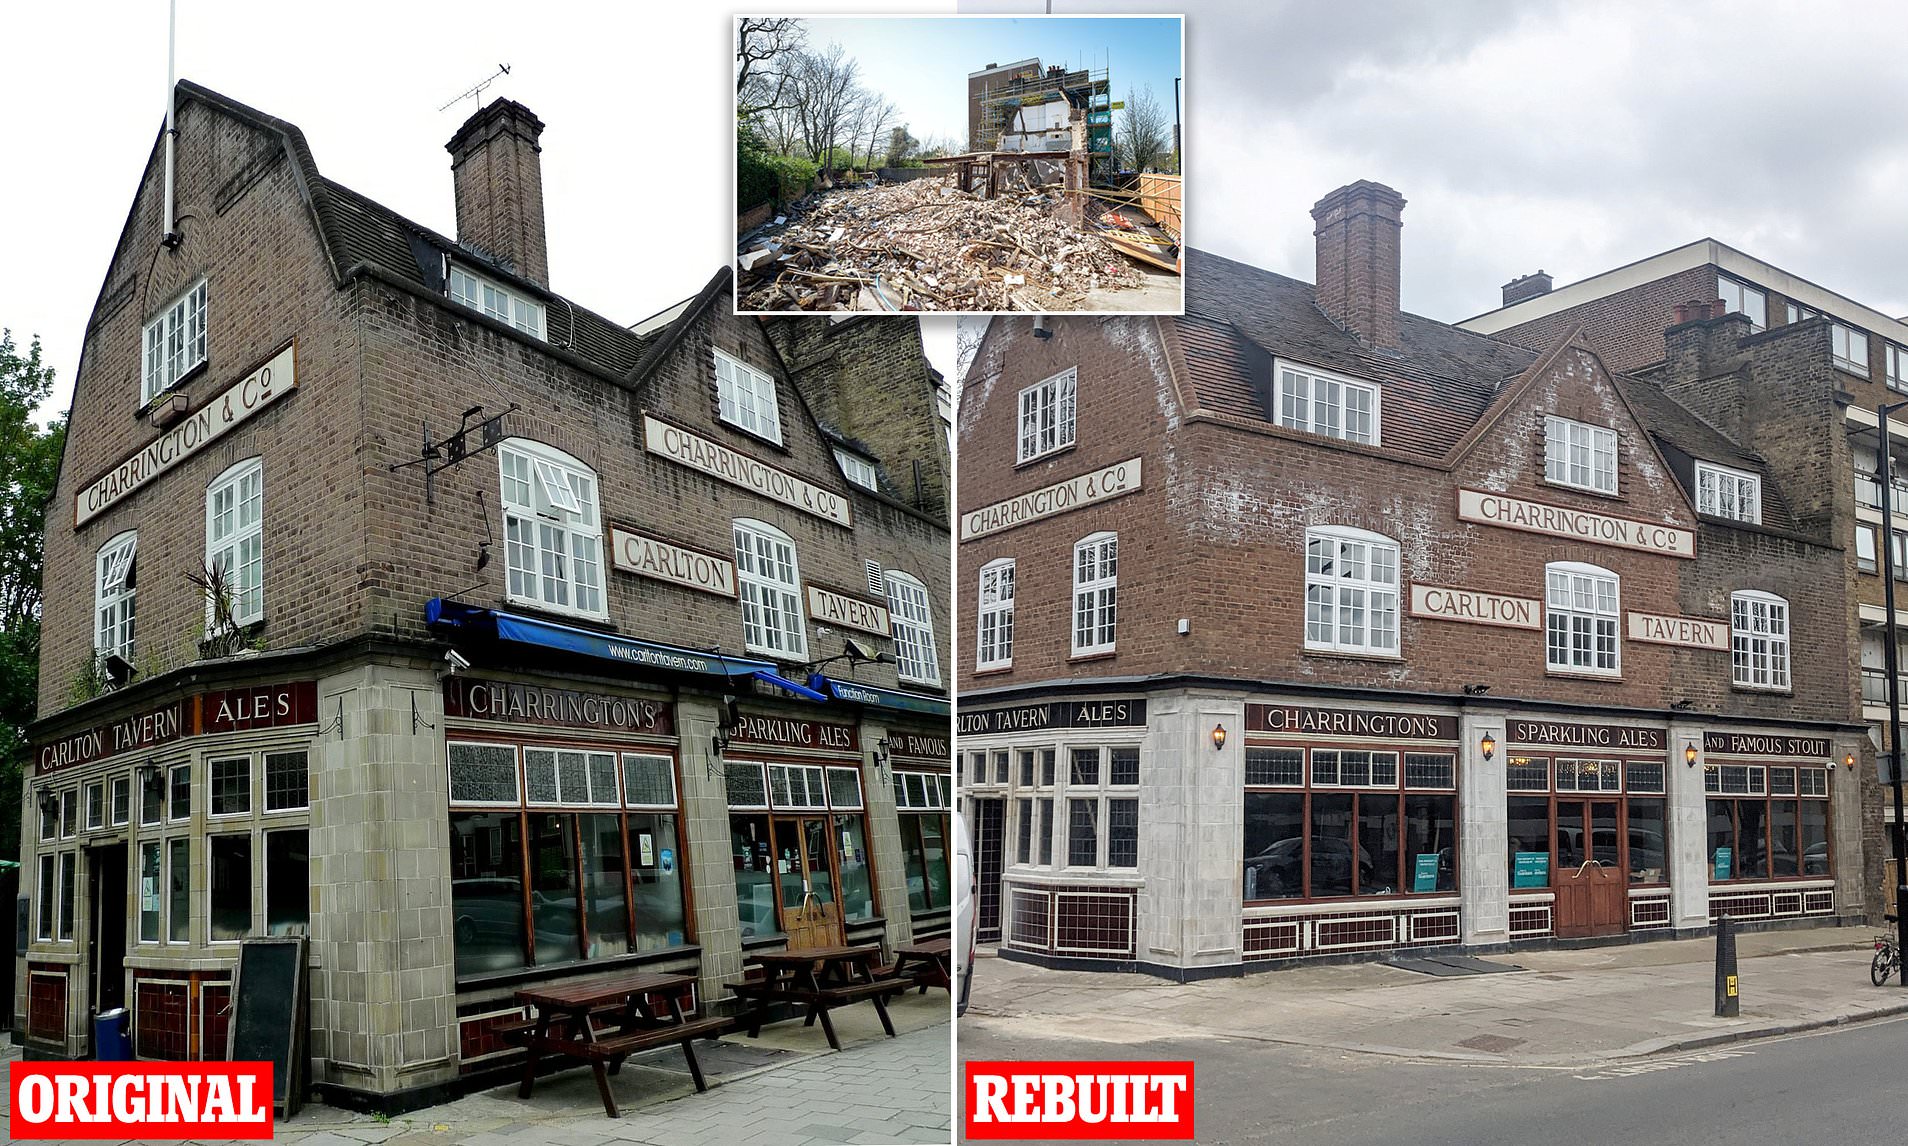 Developers Rebuilt The Carlton Tavern London As It Was Illegally Demolished In 2015